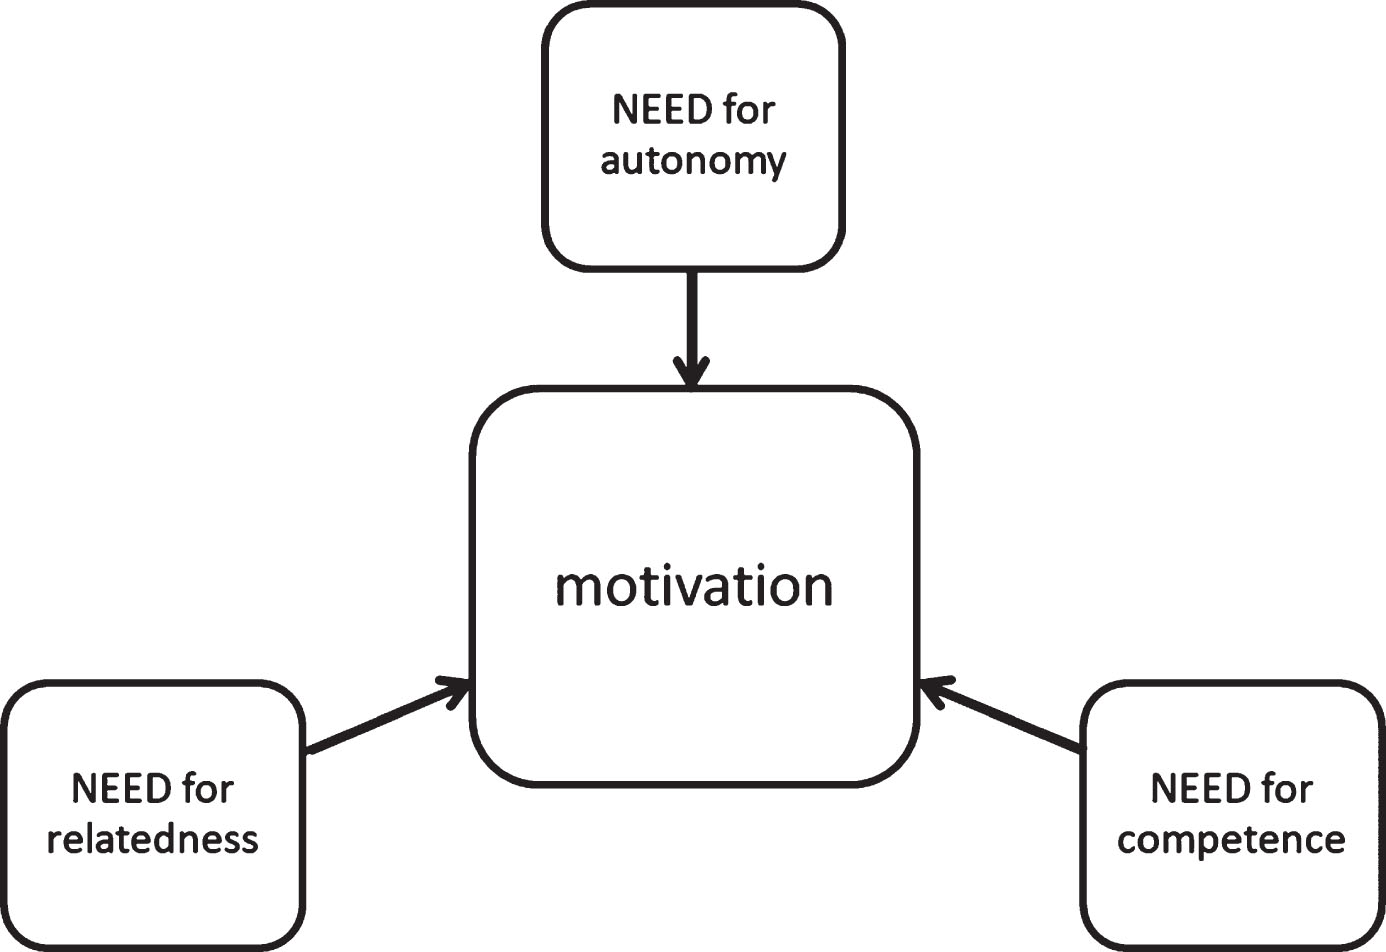 Basic needs of the Self-Determination Theory.